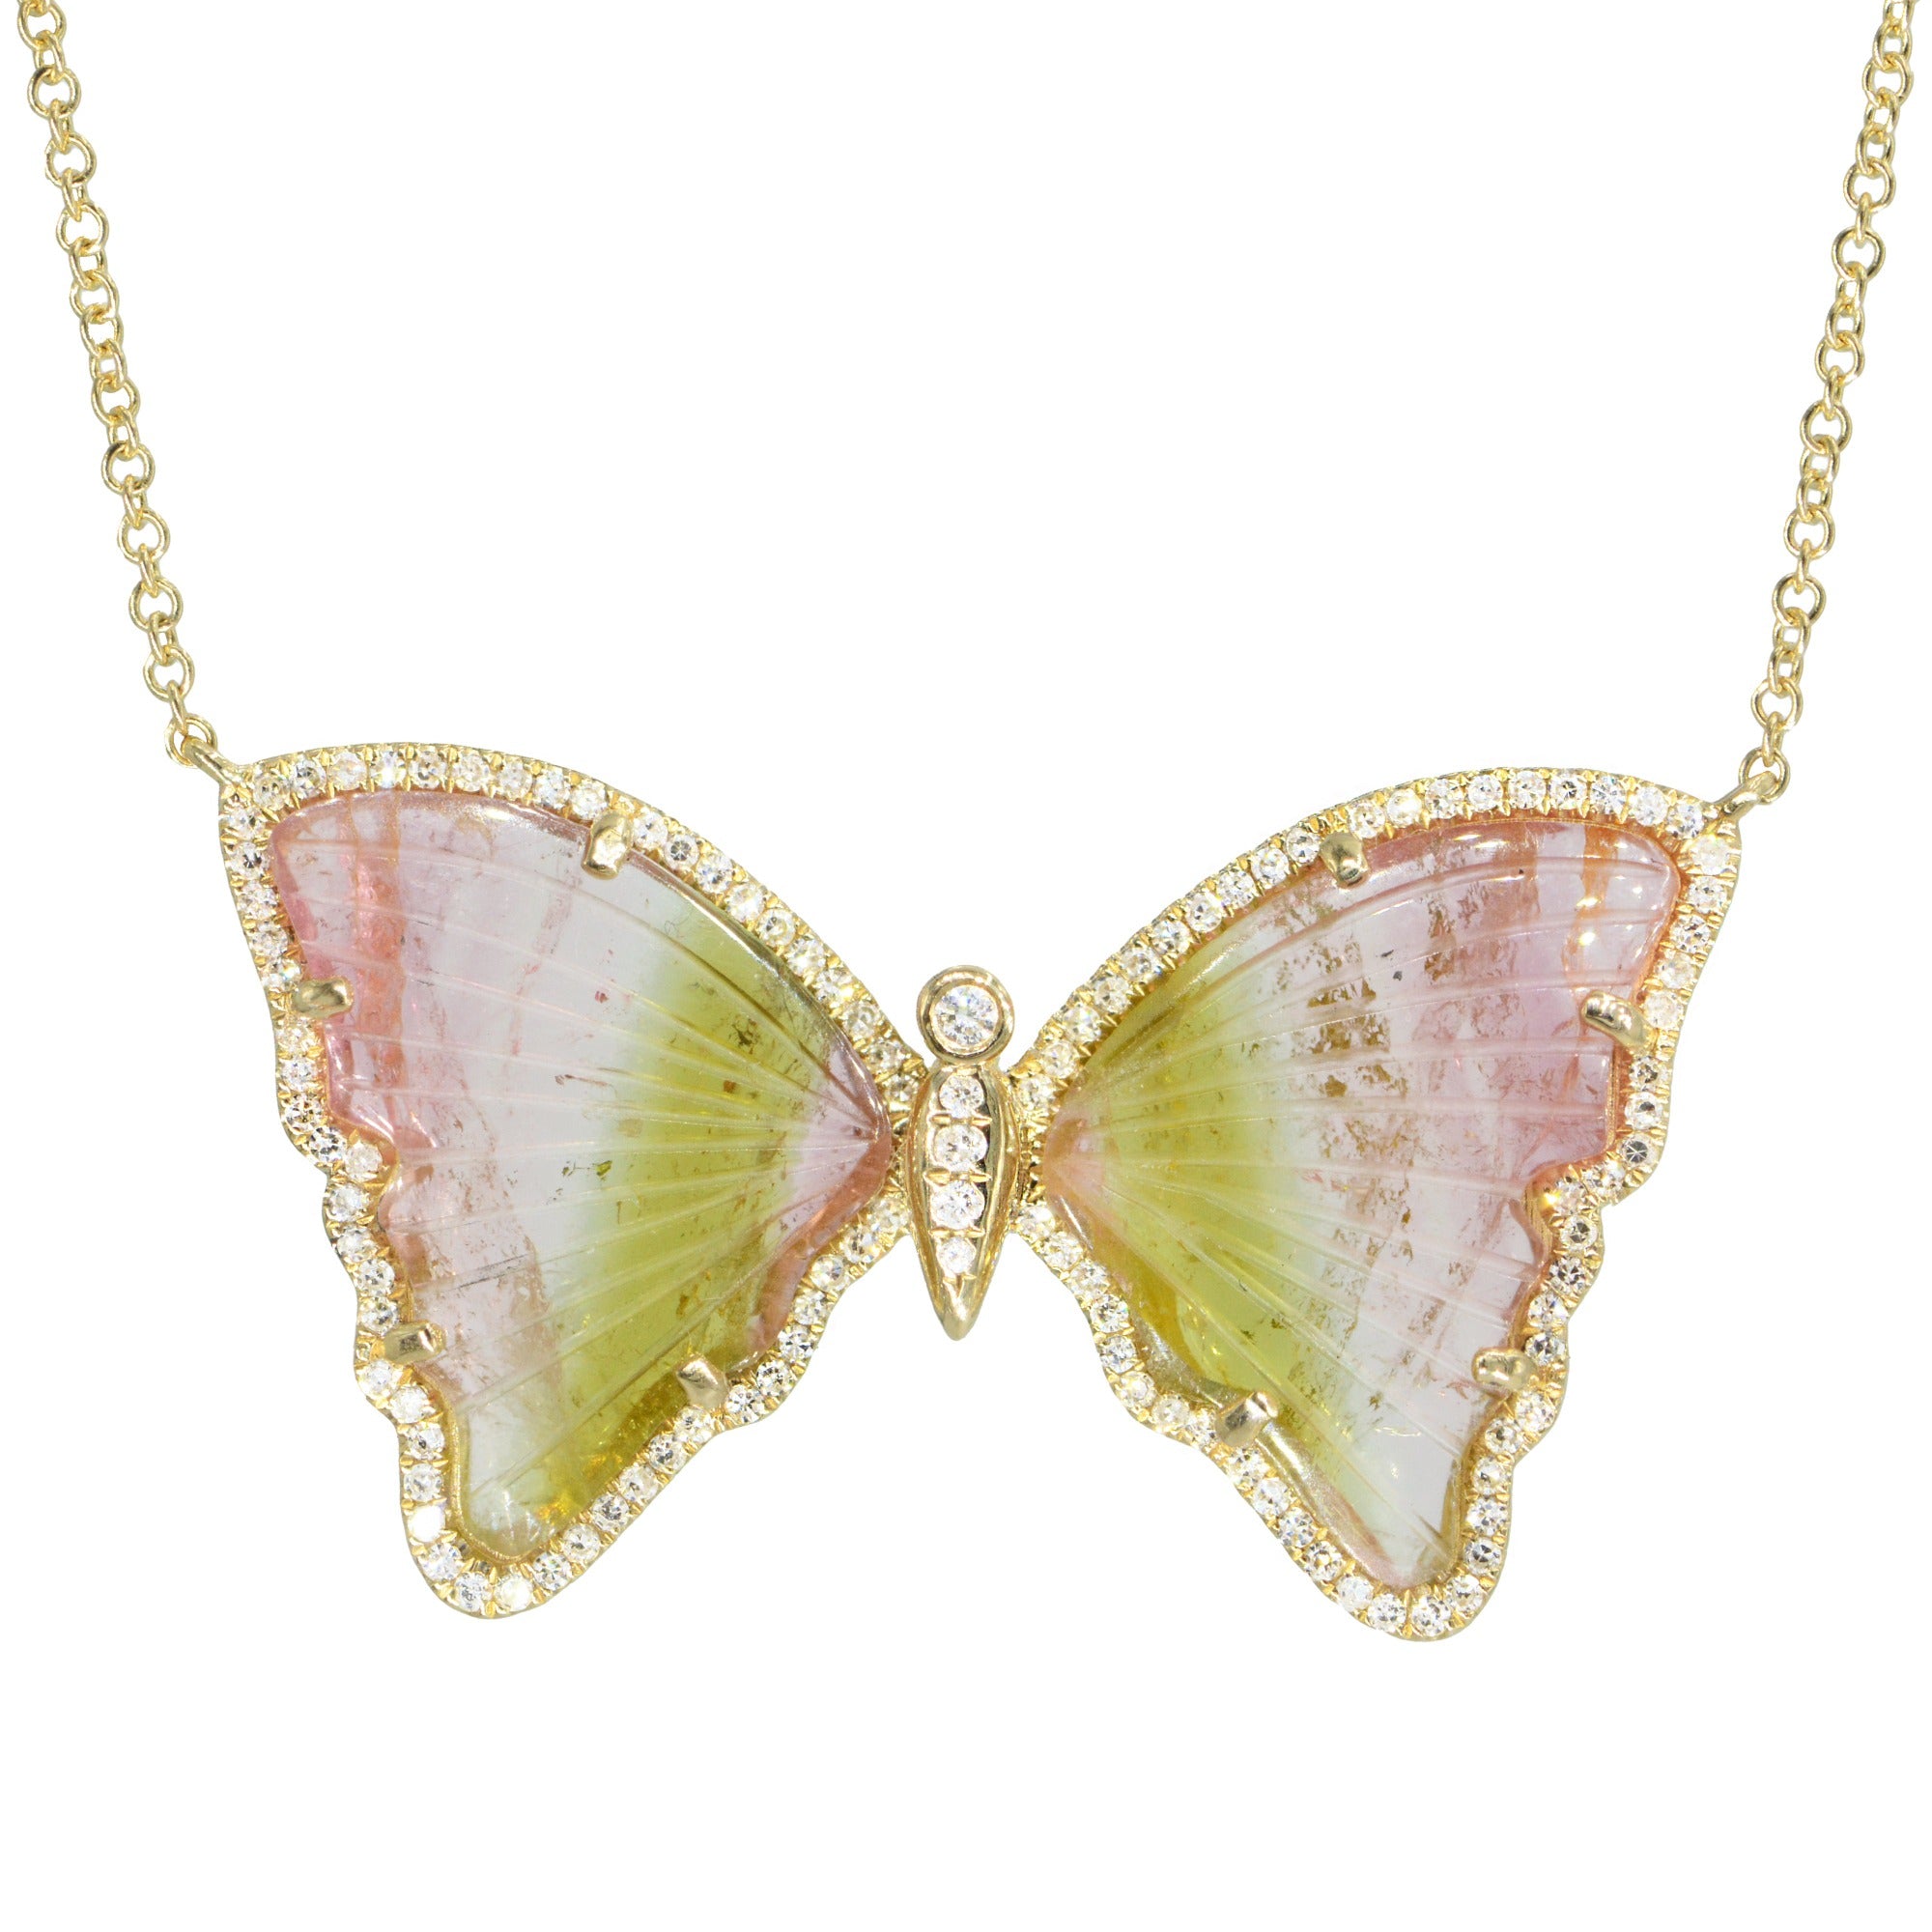 pink and green watermelon tourmaline butterfly necklace with diamonds